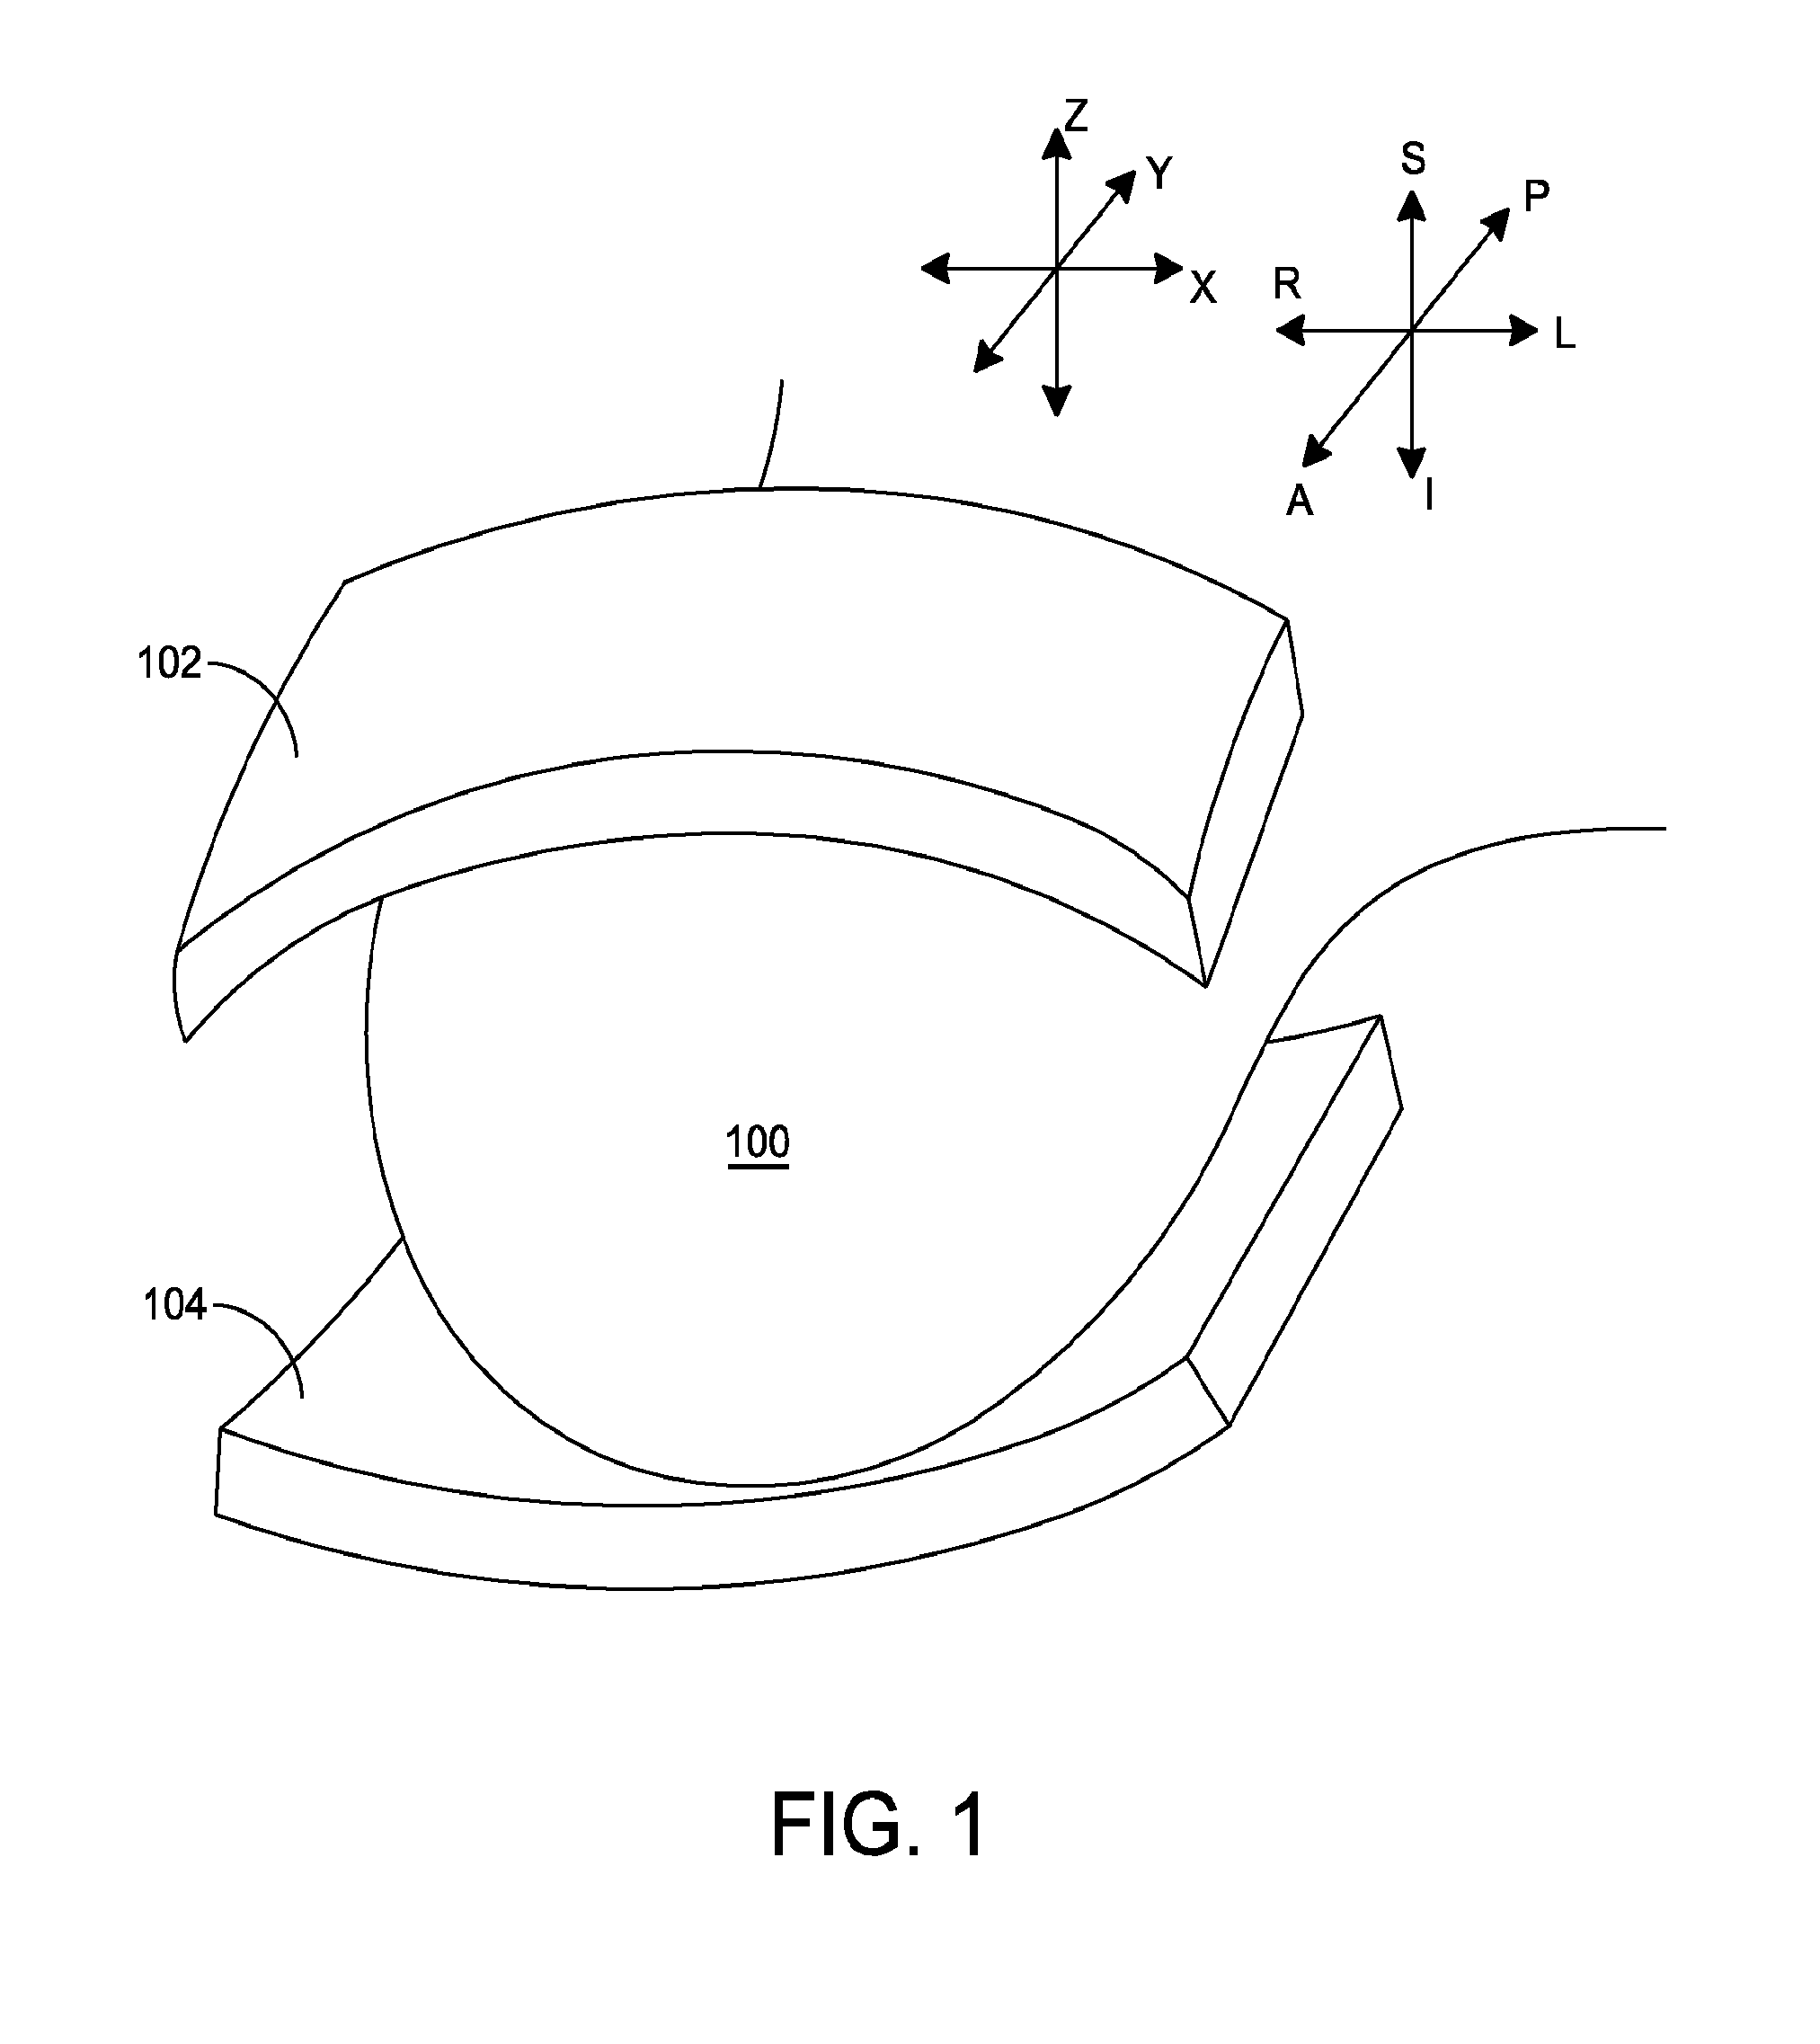 Coil systems for magnetic resonance imaging